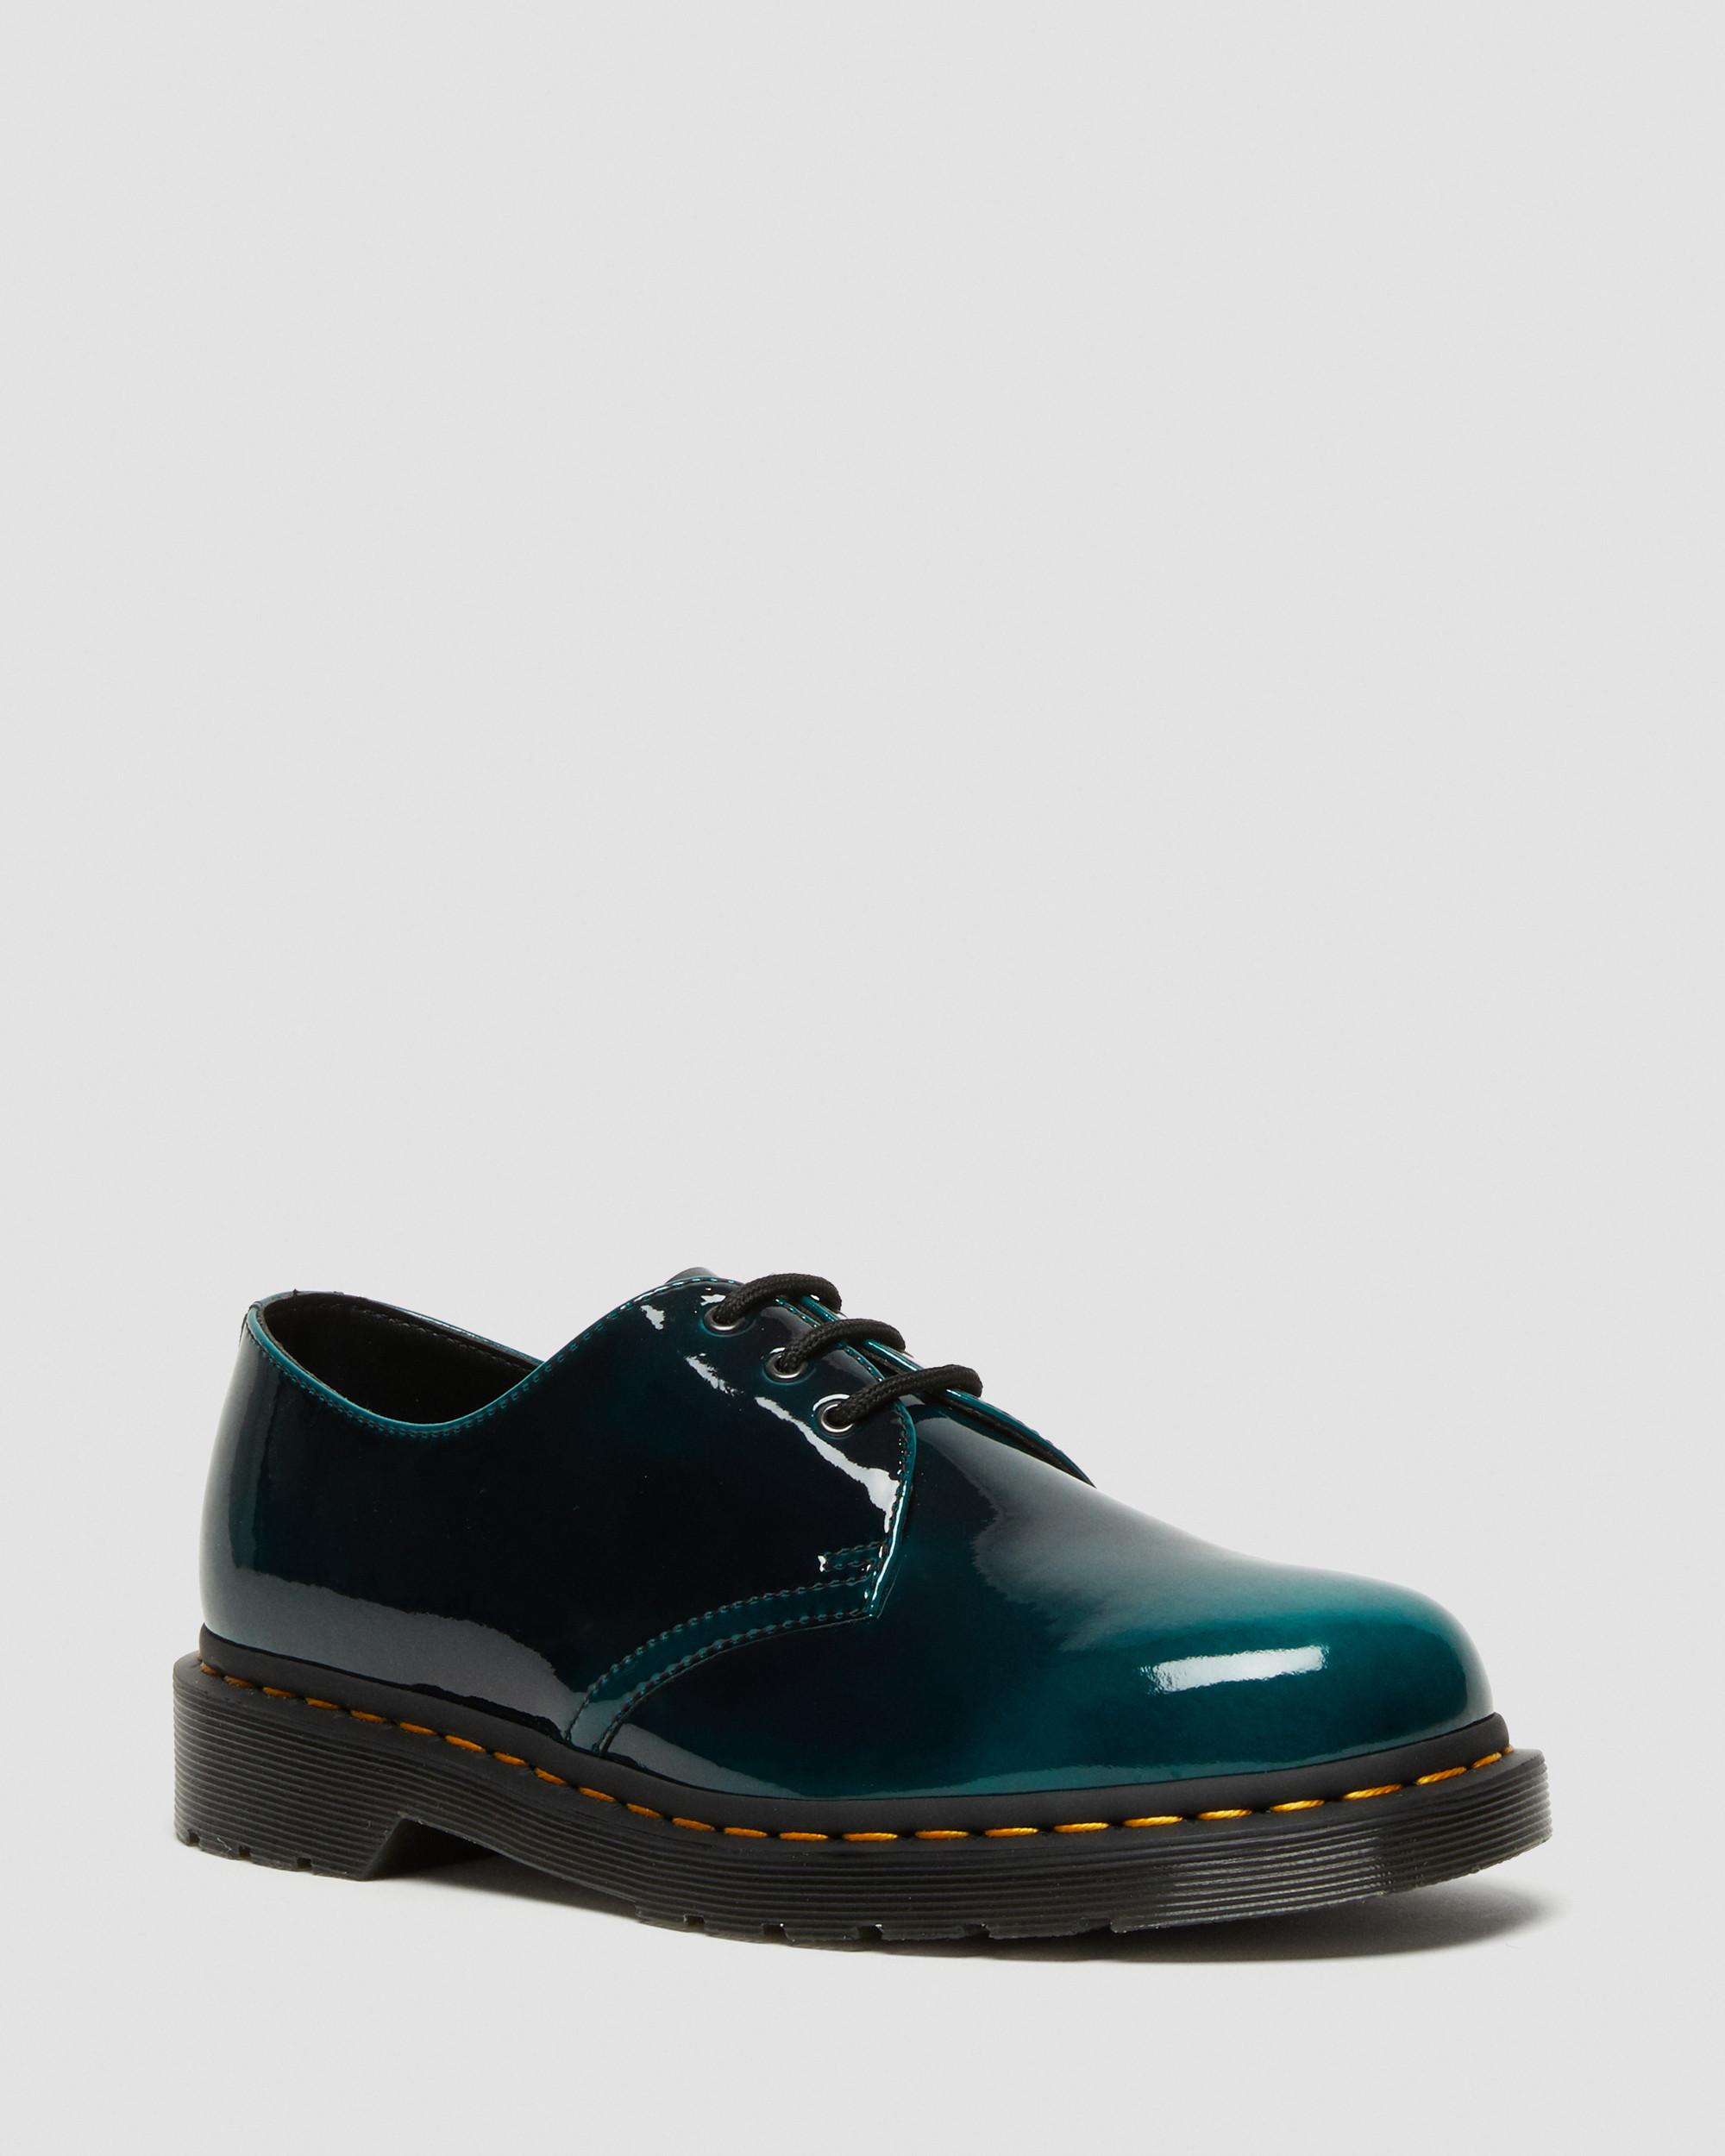 DR MARTENS Vegan 1461 Gloss Lace Up Shoes - Wishupon